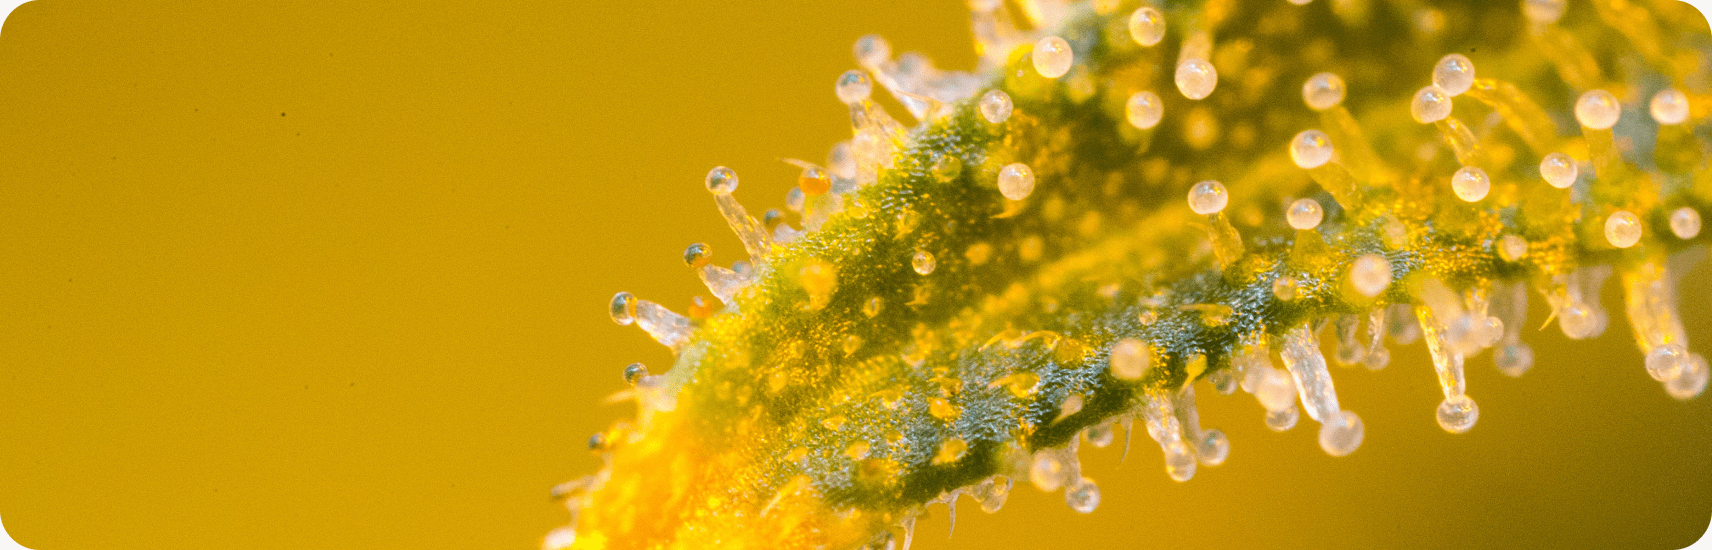 Cover Image for what are terpenes?